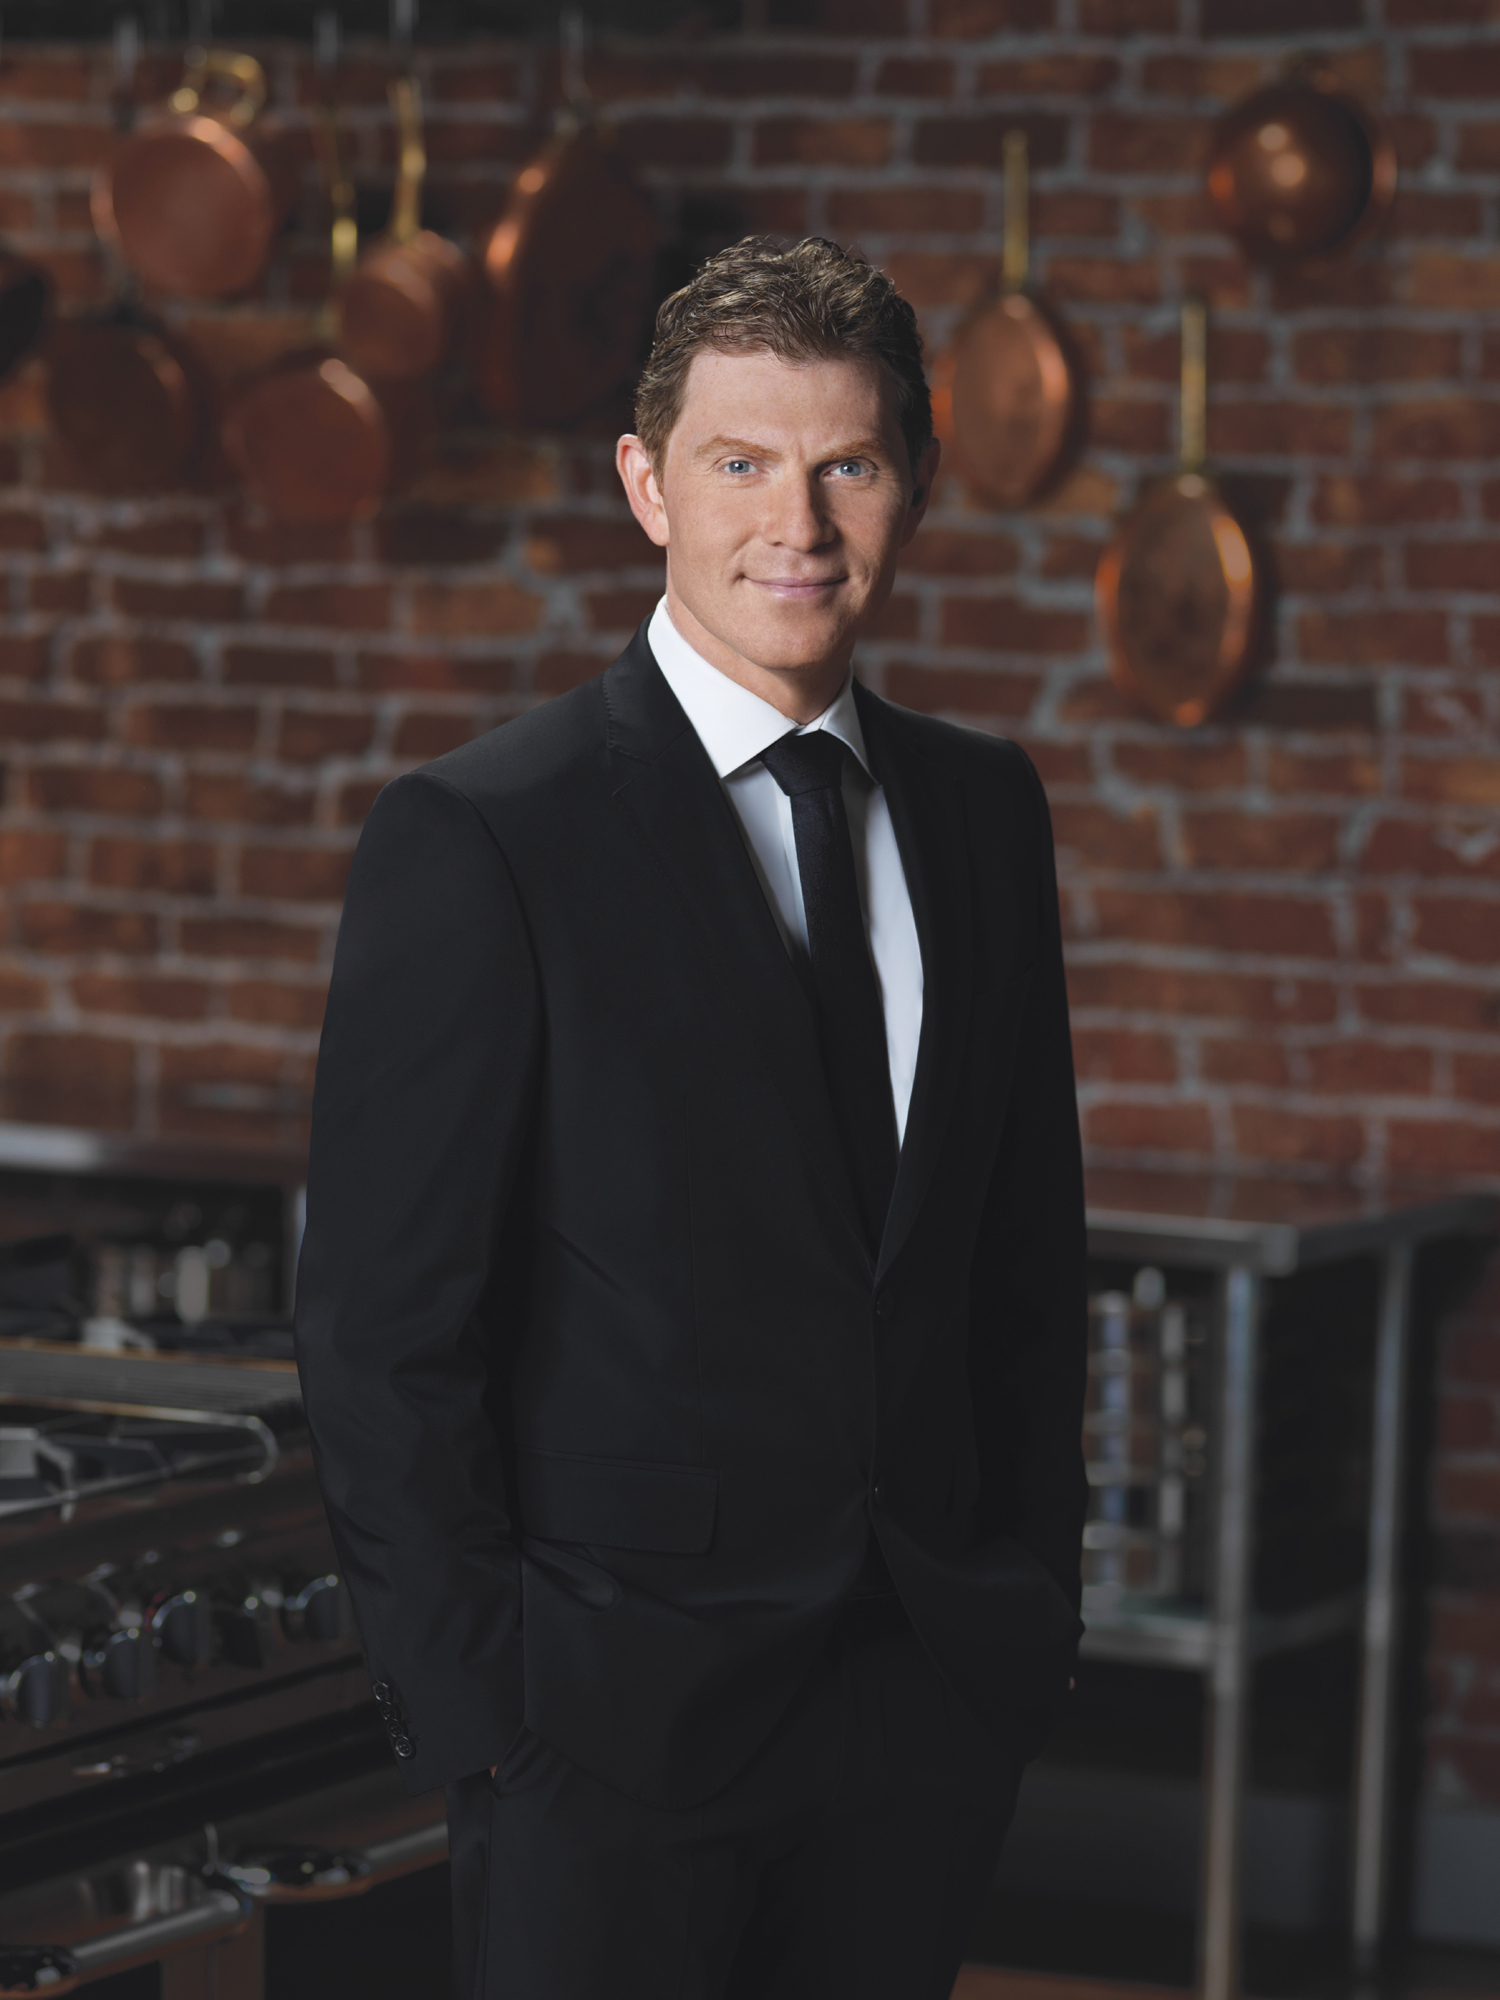 Still of Bobby Flay in The Next Food Network Star (2005)